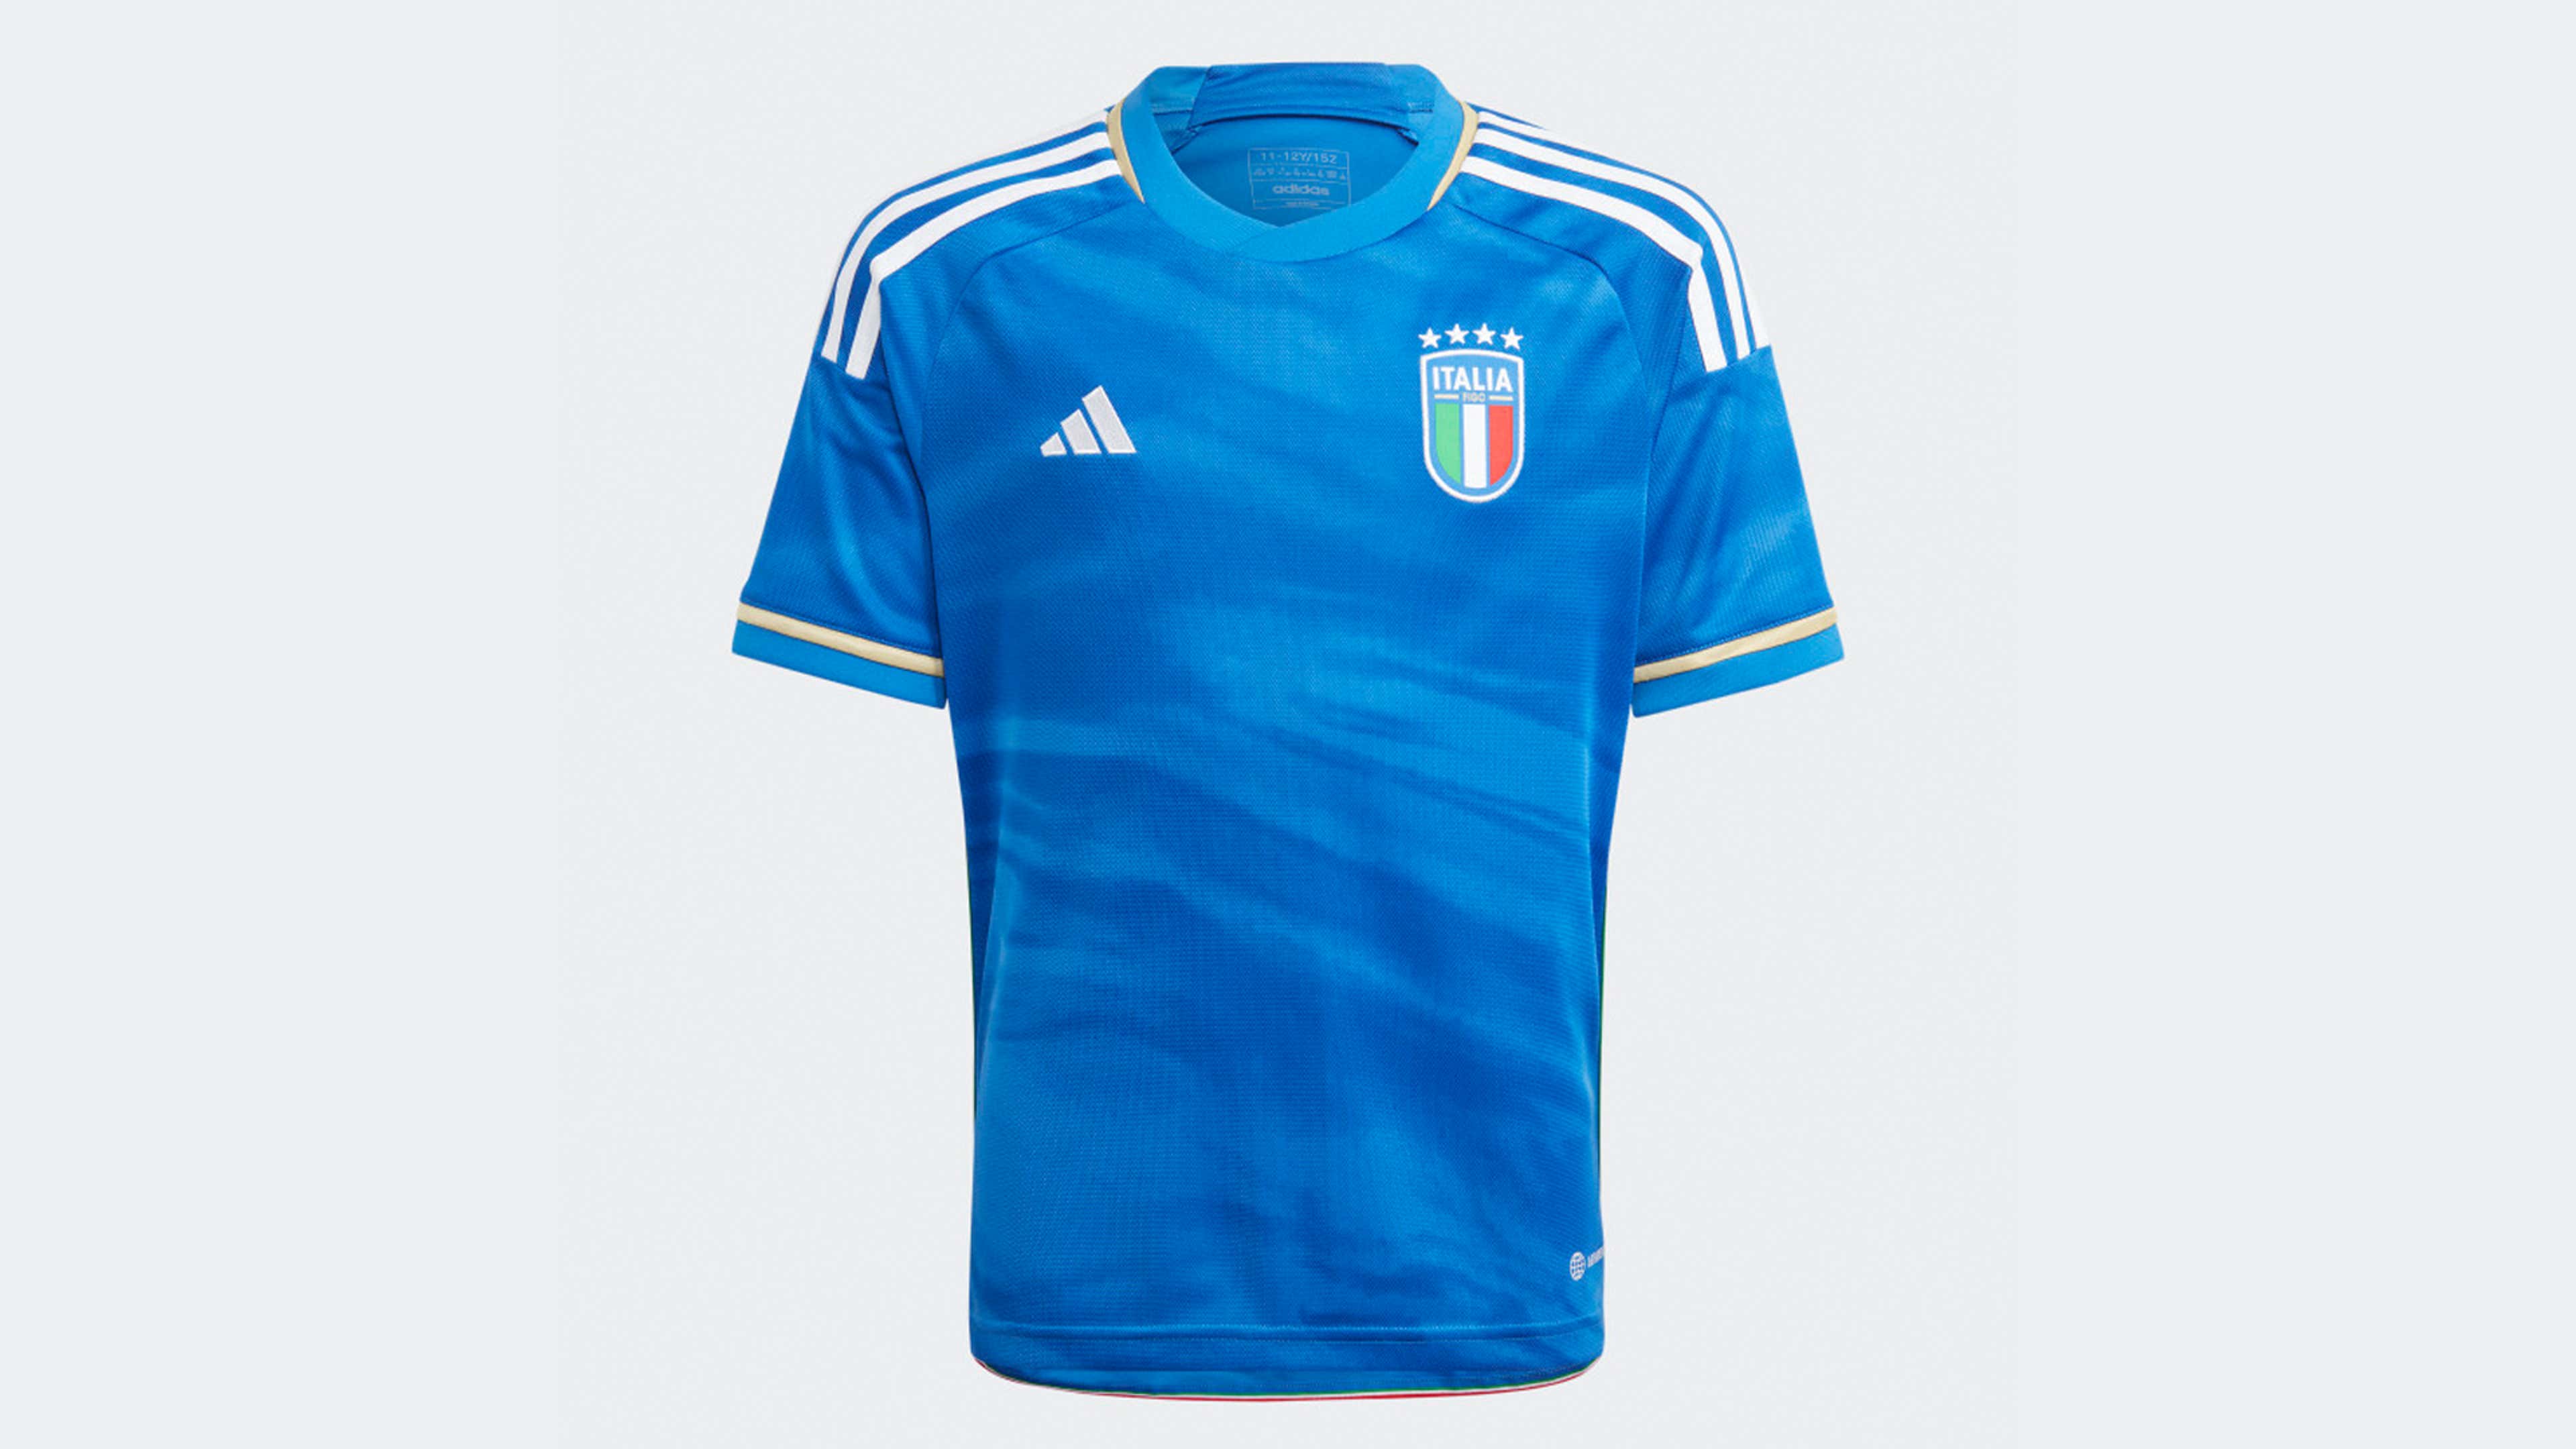 Italy Pre-Match Warm Top - Green / White / Red - Football Shirt Culture -  Latest Football Kit News and More